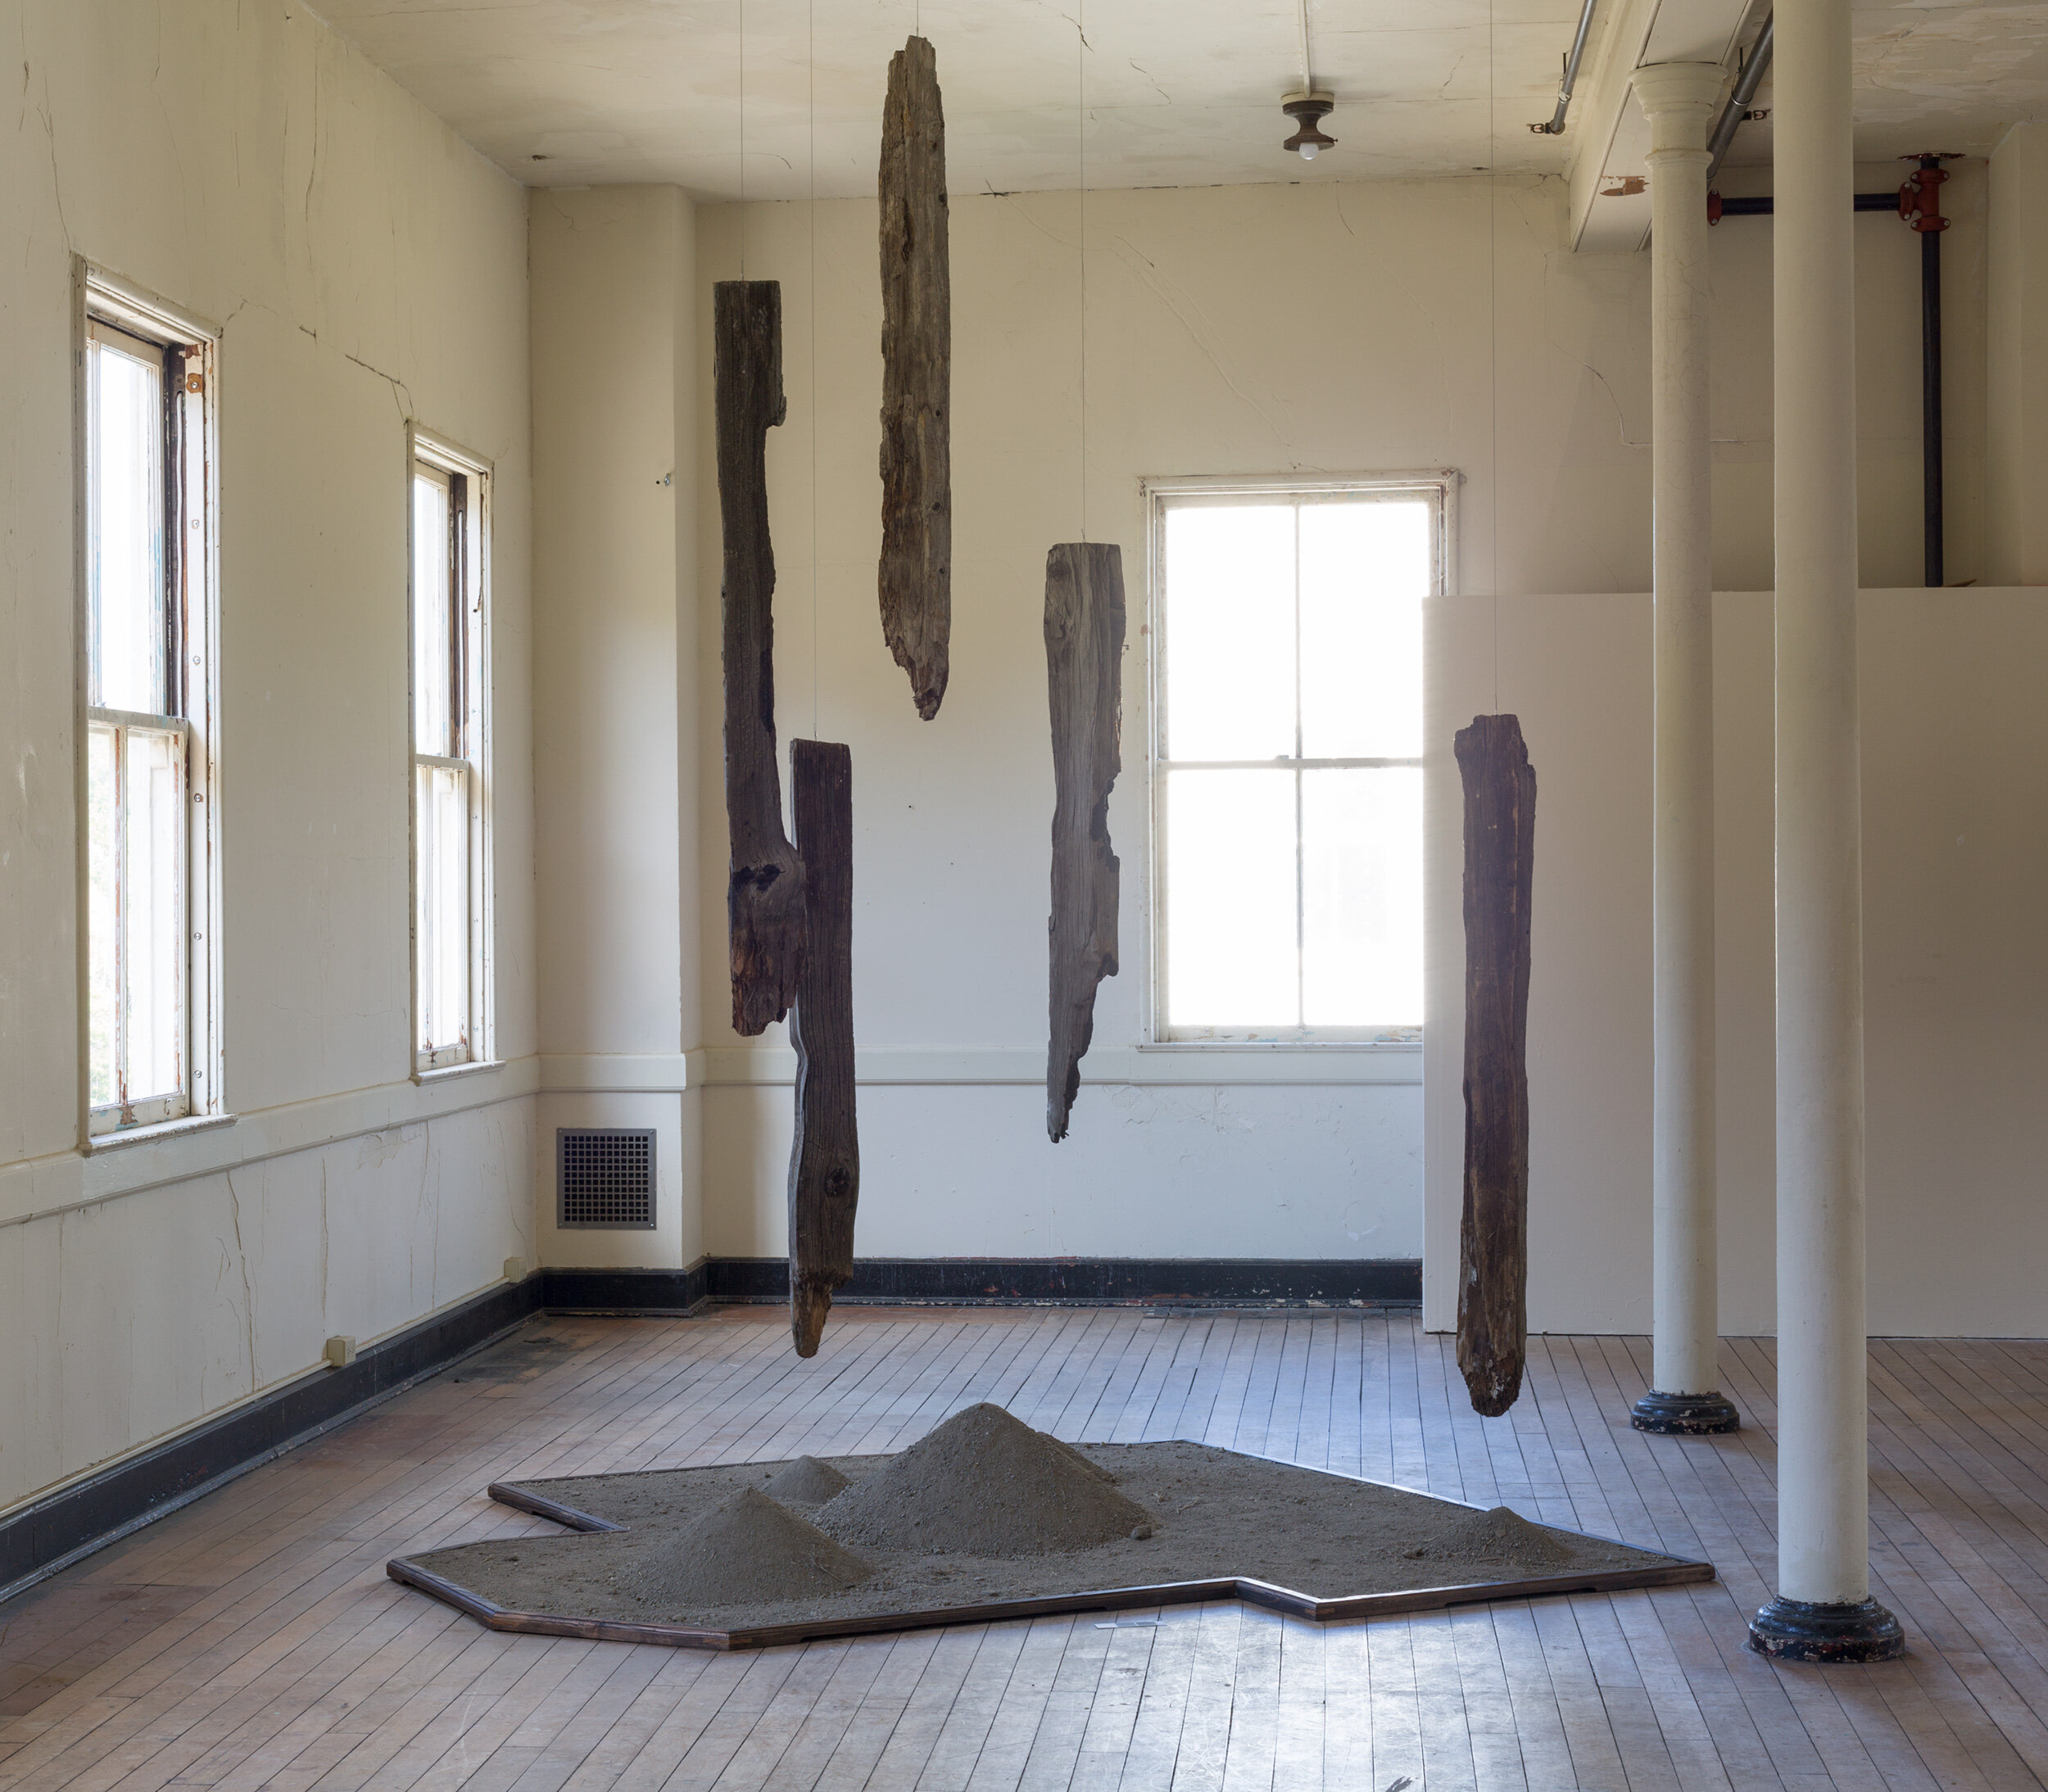   Mark Baugh-Sasaki, Uprooted Fence posts and earth from Tulelake Segregation Center, and steel cable 120" x 96" x 84" 2018      